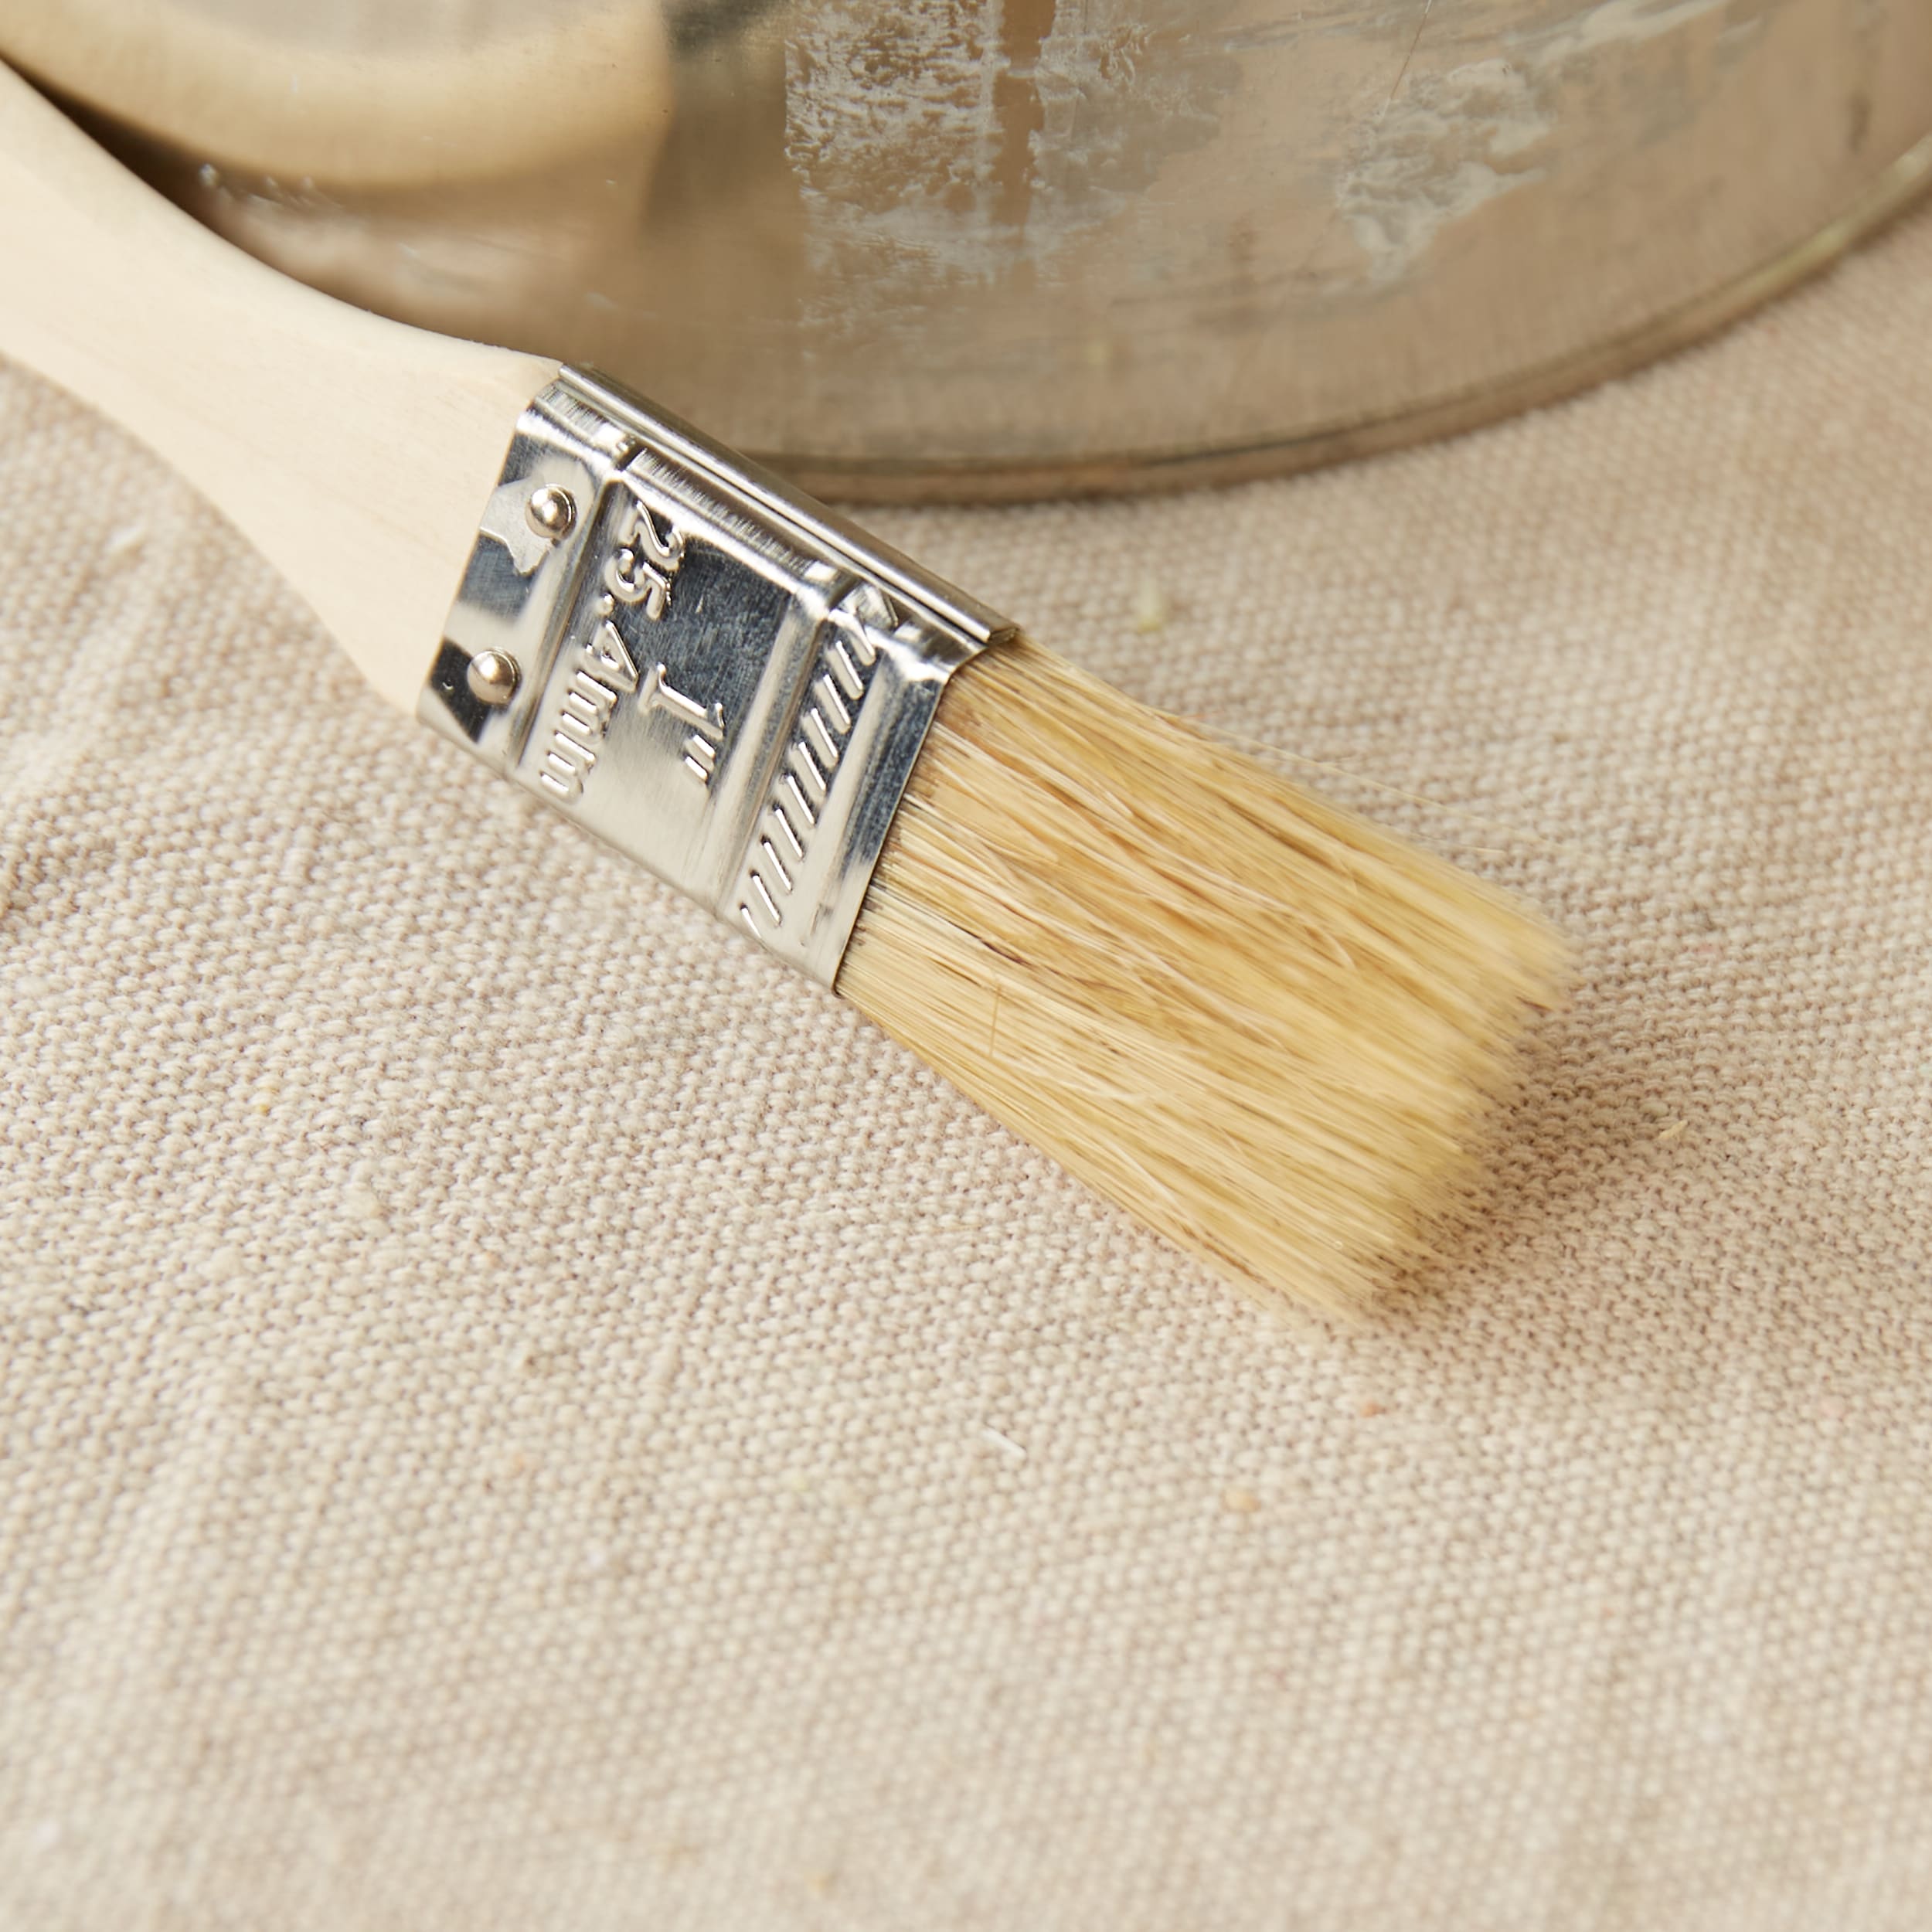 Project Source 4-in Natural Bristle Flat Paint Brush (Chip Brush)